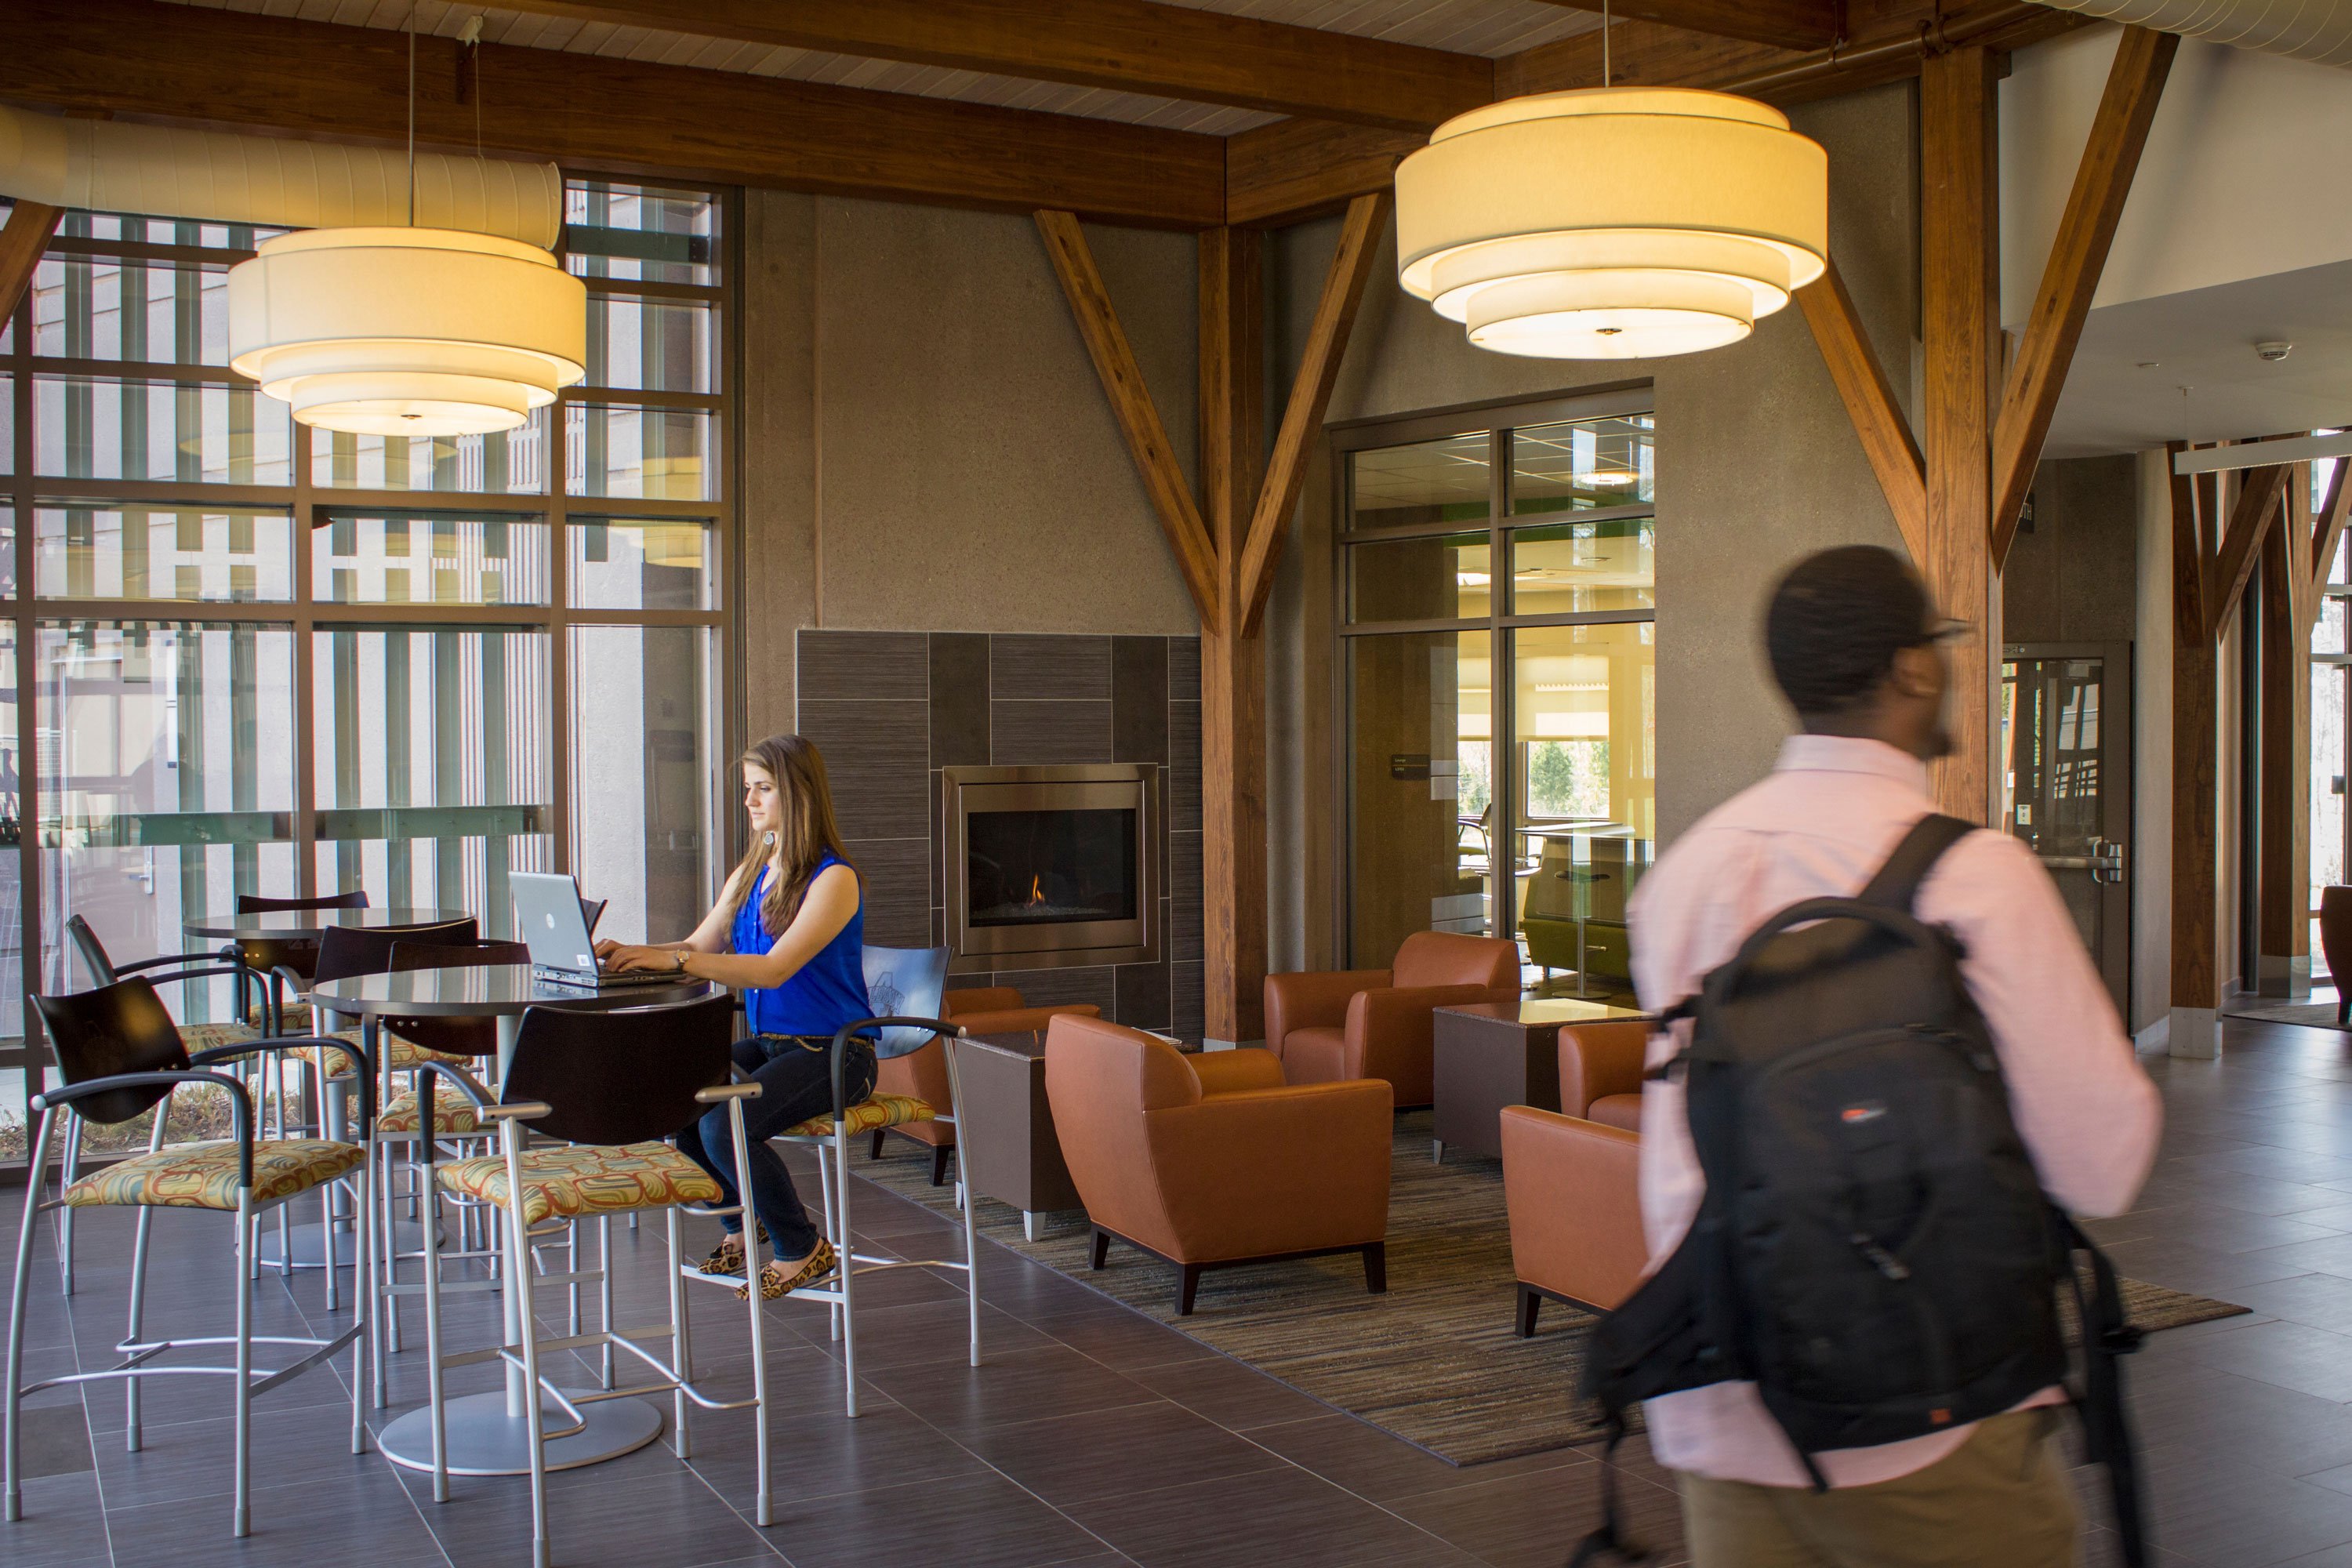 A student works on her laptop, while another walks by, in the Liberty Terrace lobby, which has a fireplace, high top tables and arm chairs